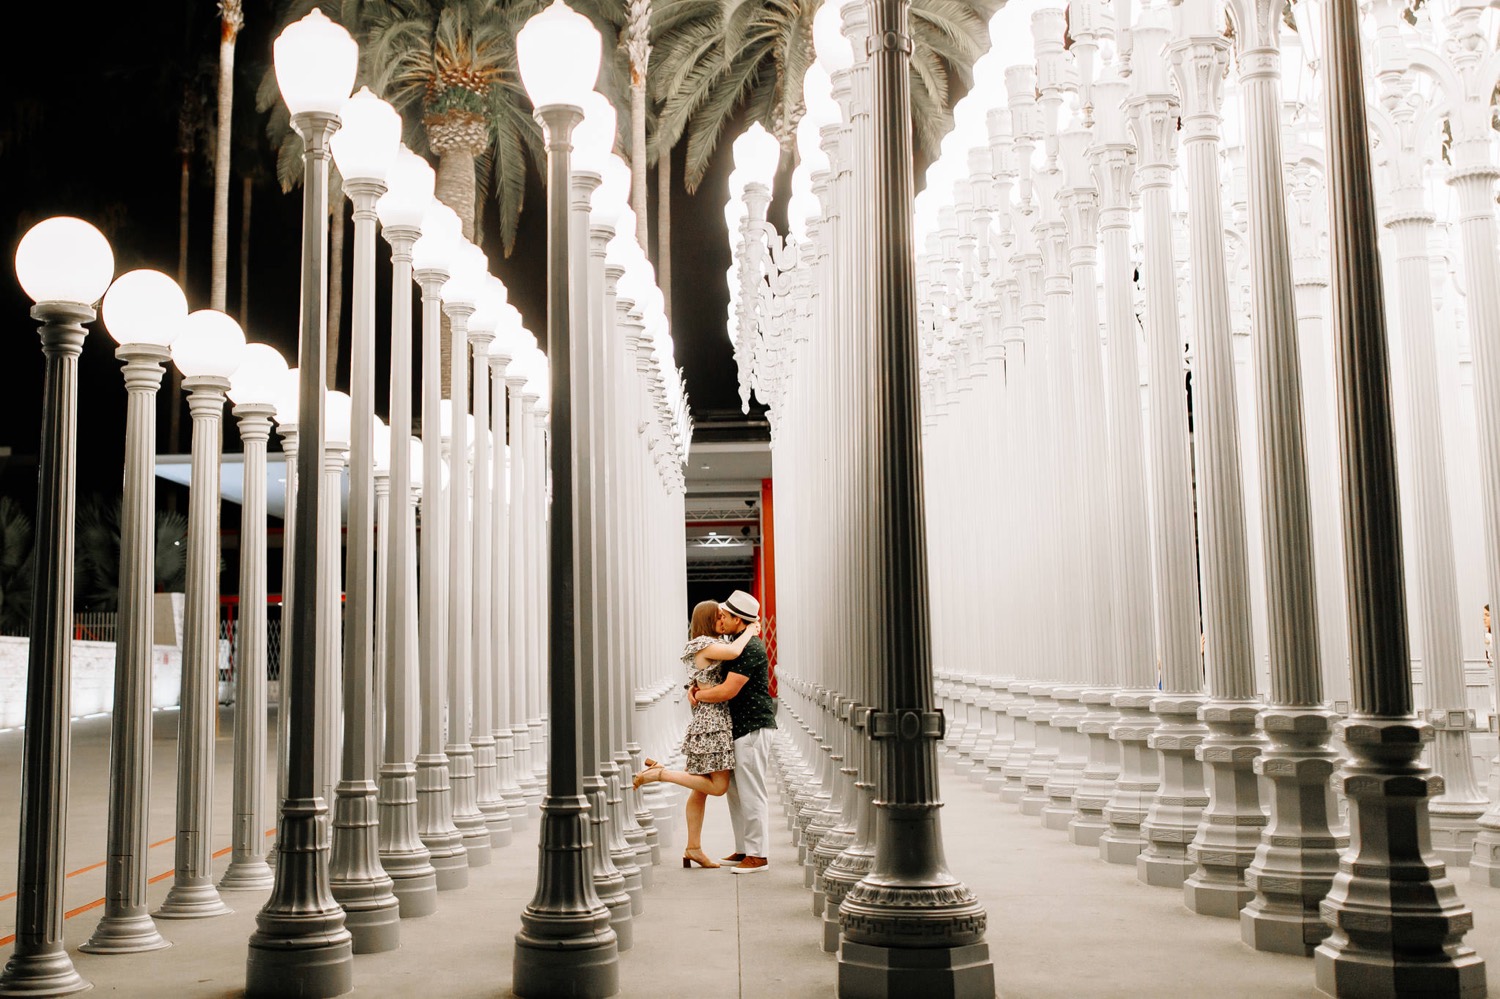 light installation and museum photos in LA